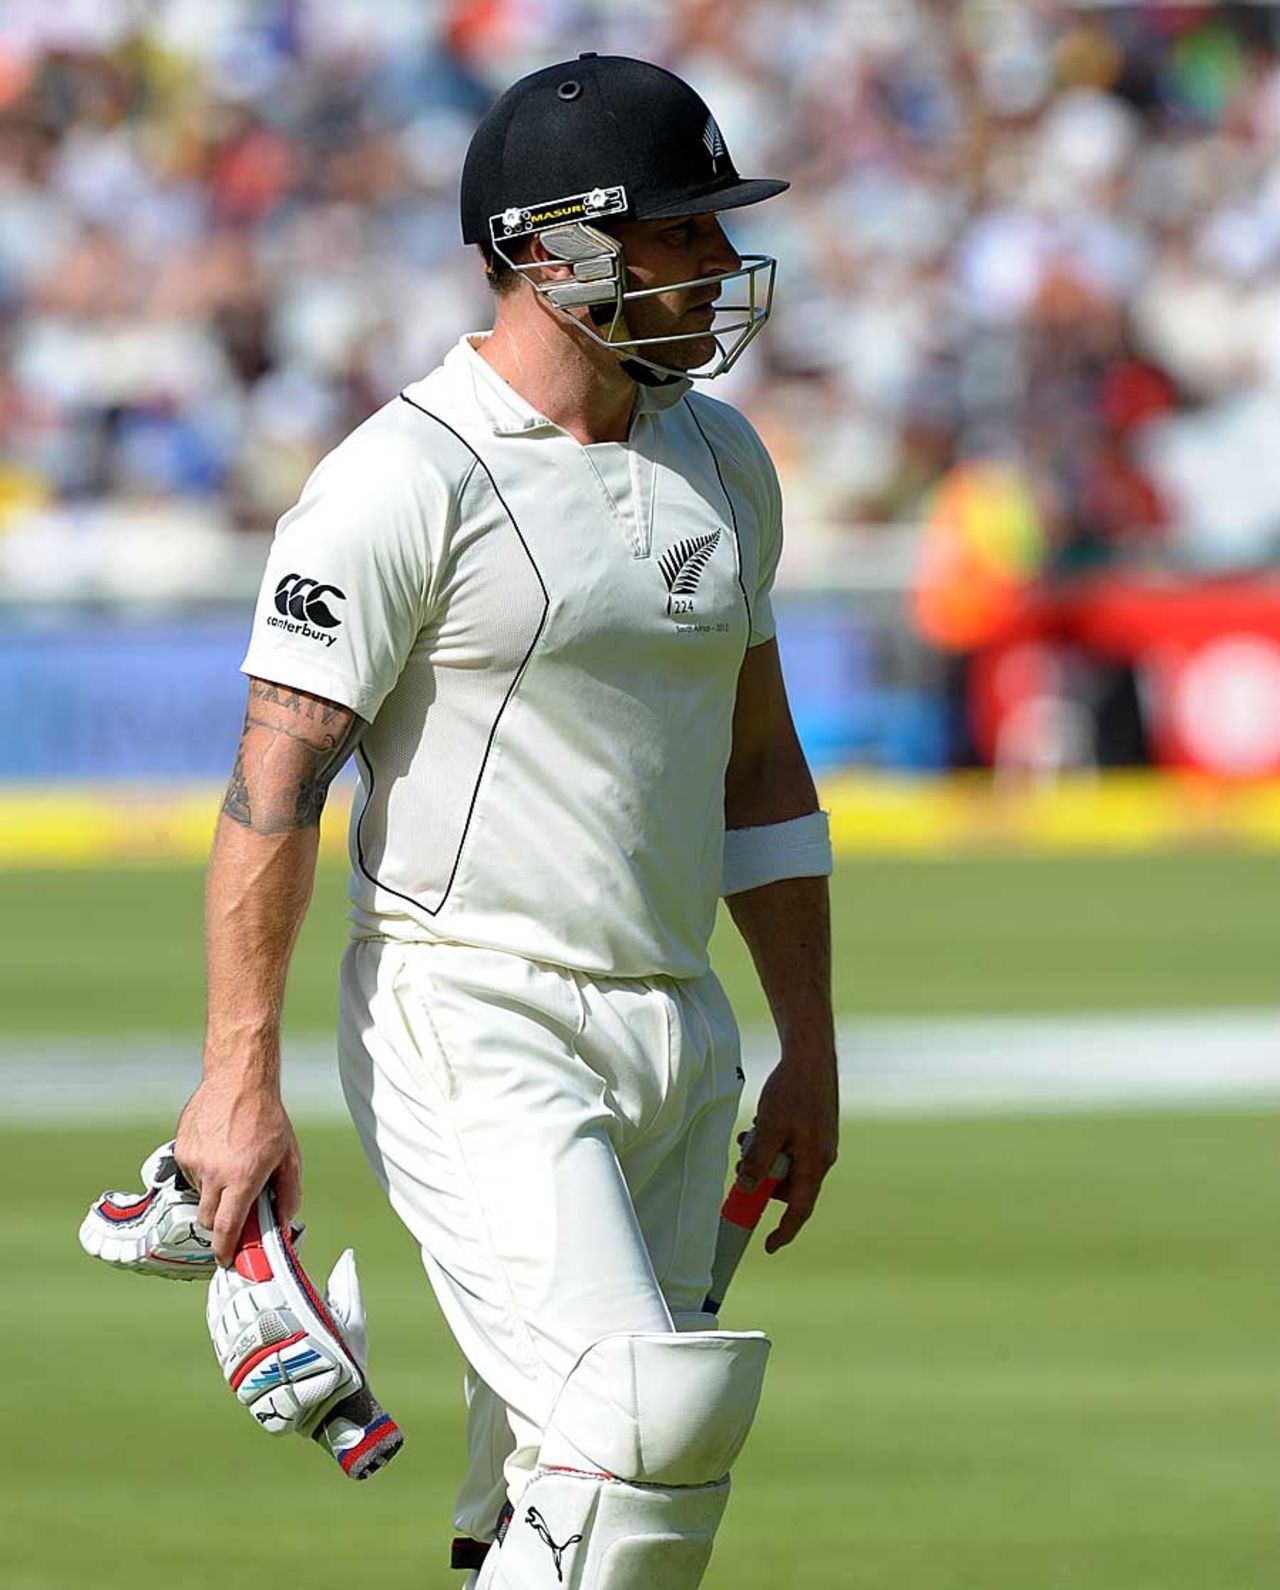 Brendon McCullum fell for 51, South Africa v New Zealand, 1st Test, Cape Town, 2nd day, January 3, 2013